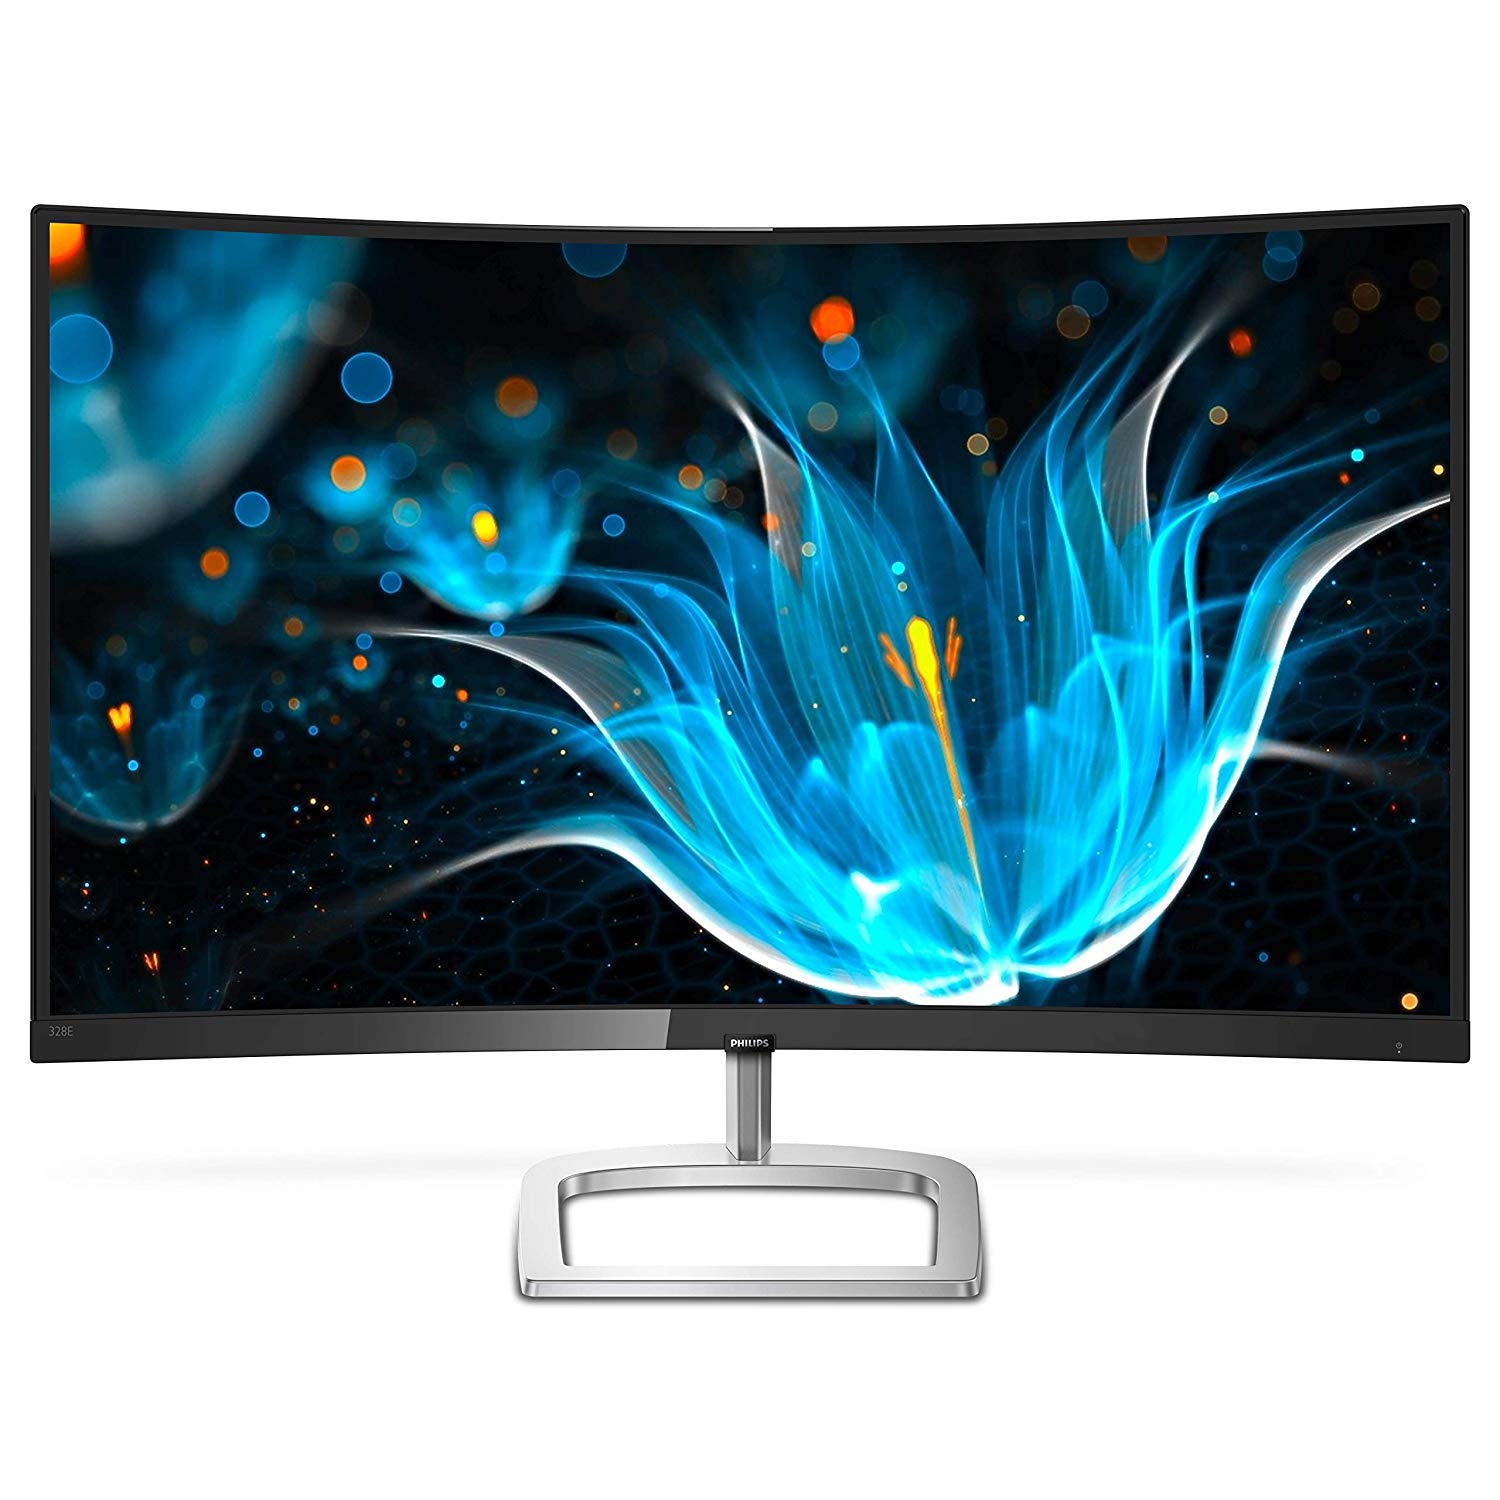 Top Reasons Why Curvy is Better Than Flat (When it Comes to Gaming Monitors)